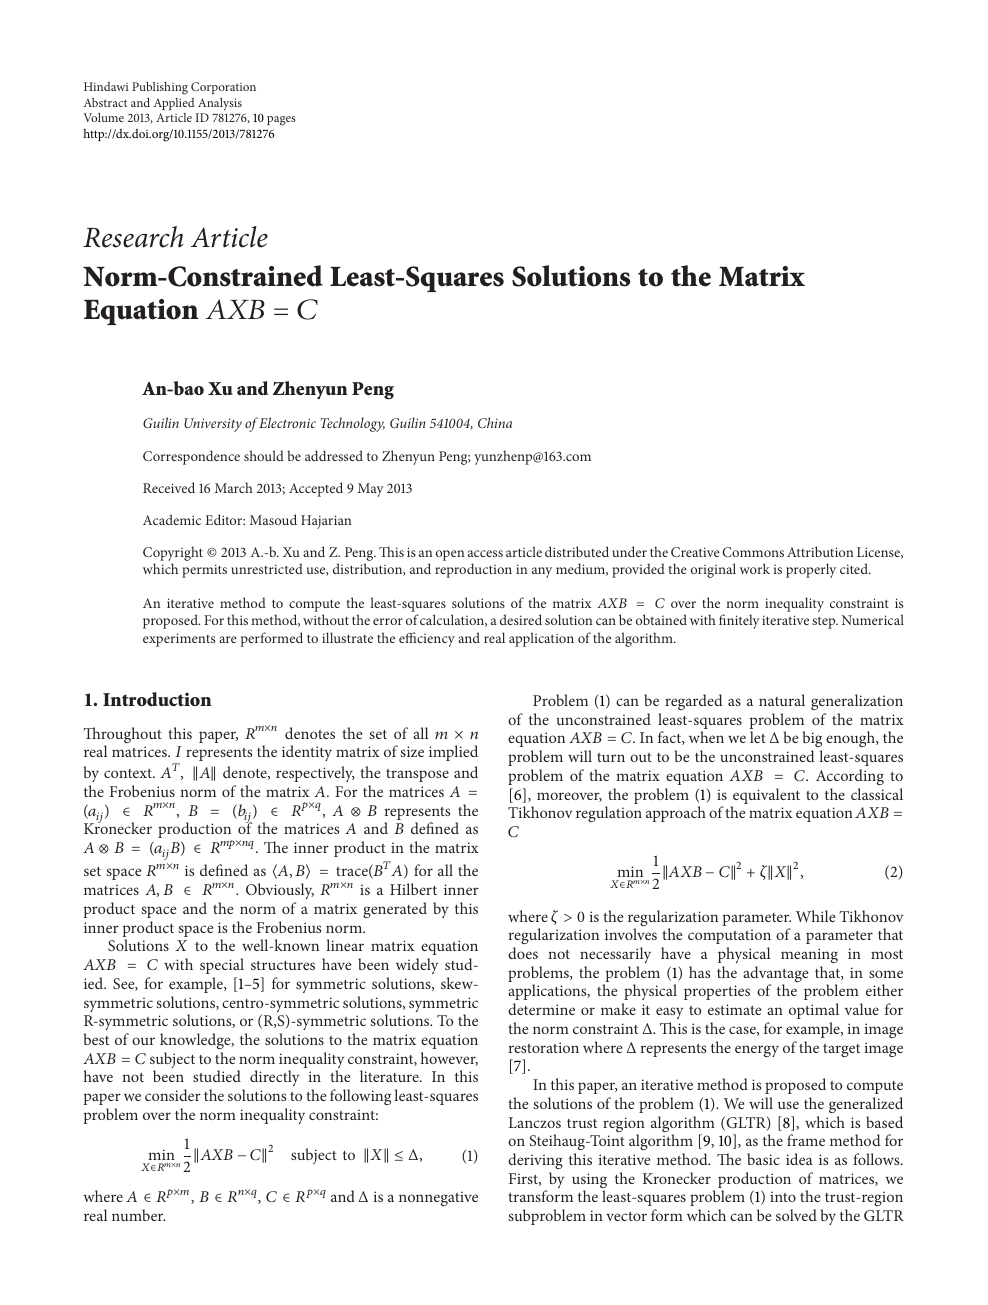 Norm Constrained Least Squares Solutions To The Matrix Equation A X B C Topic Of Research Paper In Mathematics Download Scholarly Article Pdf And Read For Free On Cyberleninka Open Science Hub